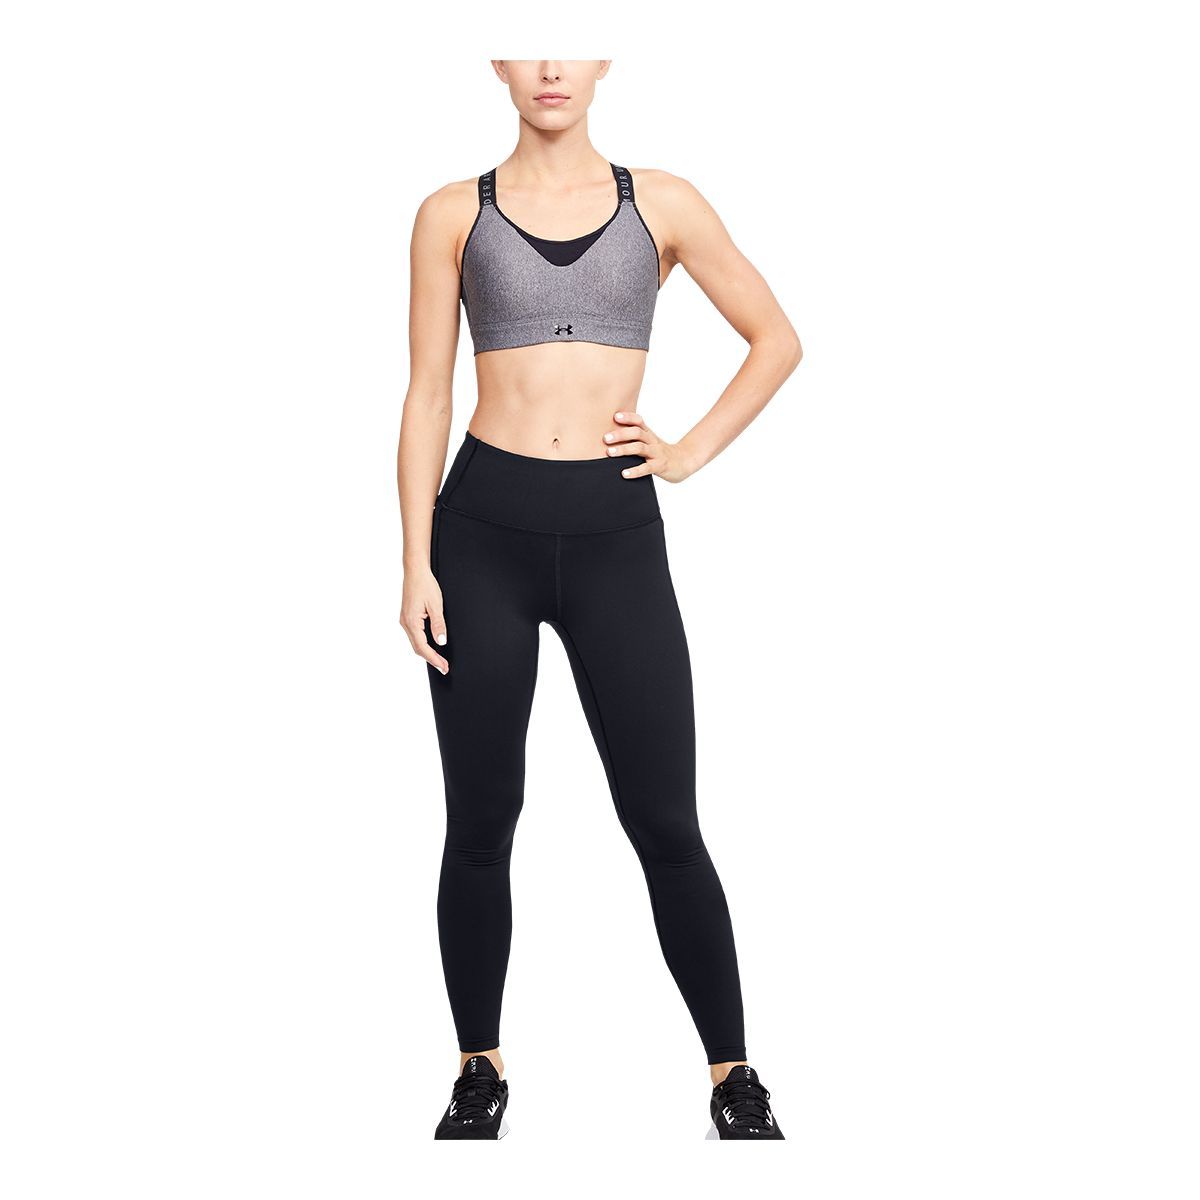 Under Armour Women's Meridian Tights